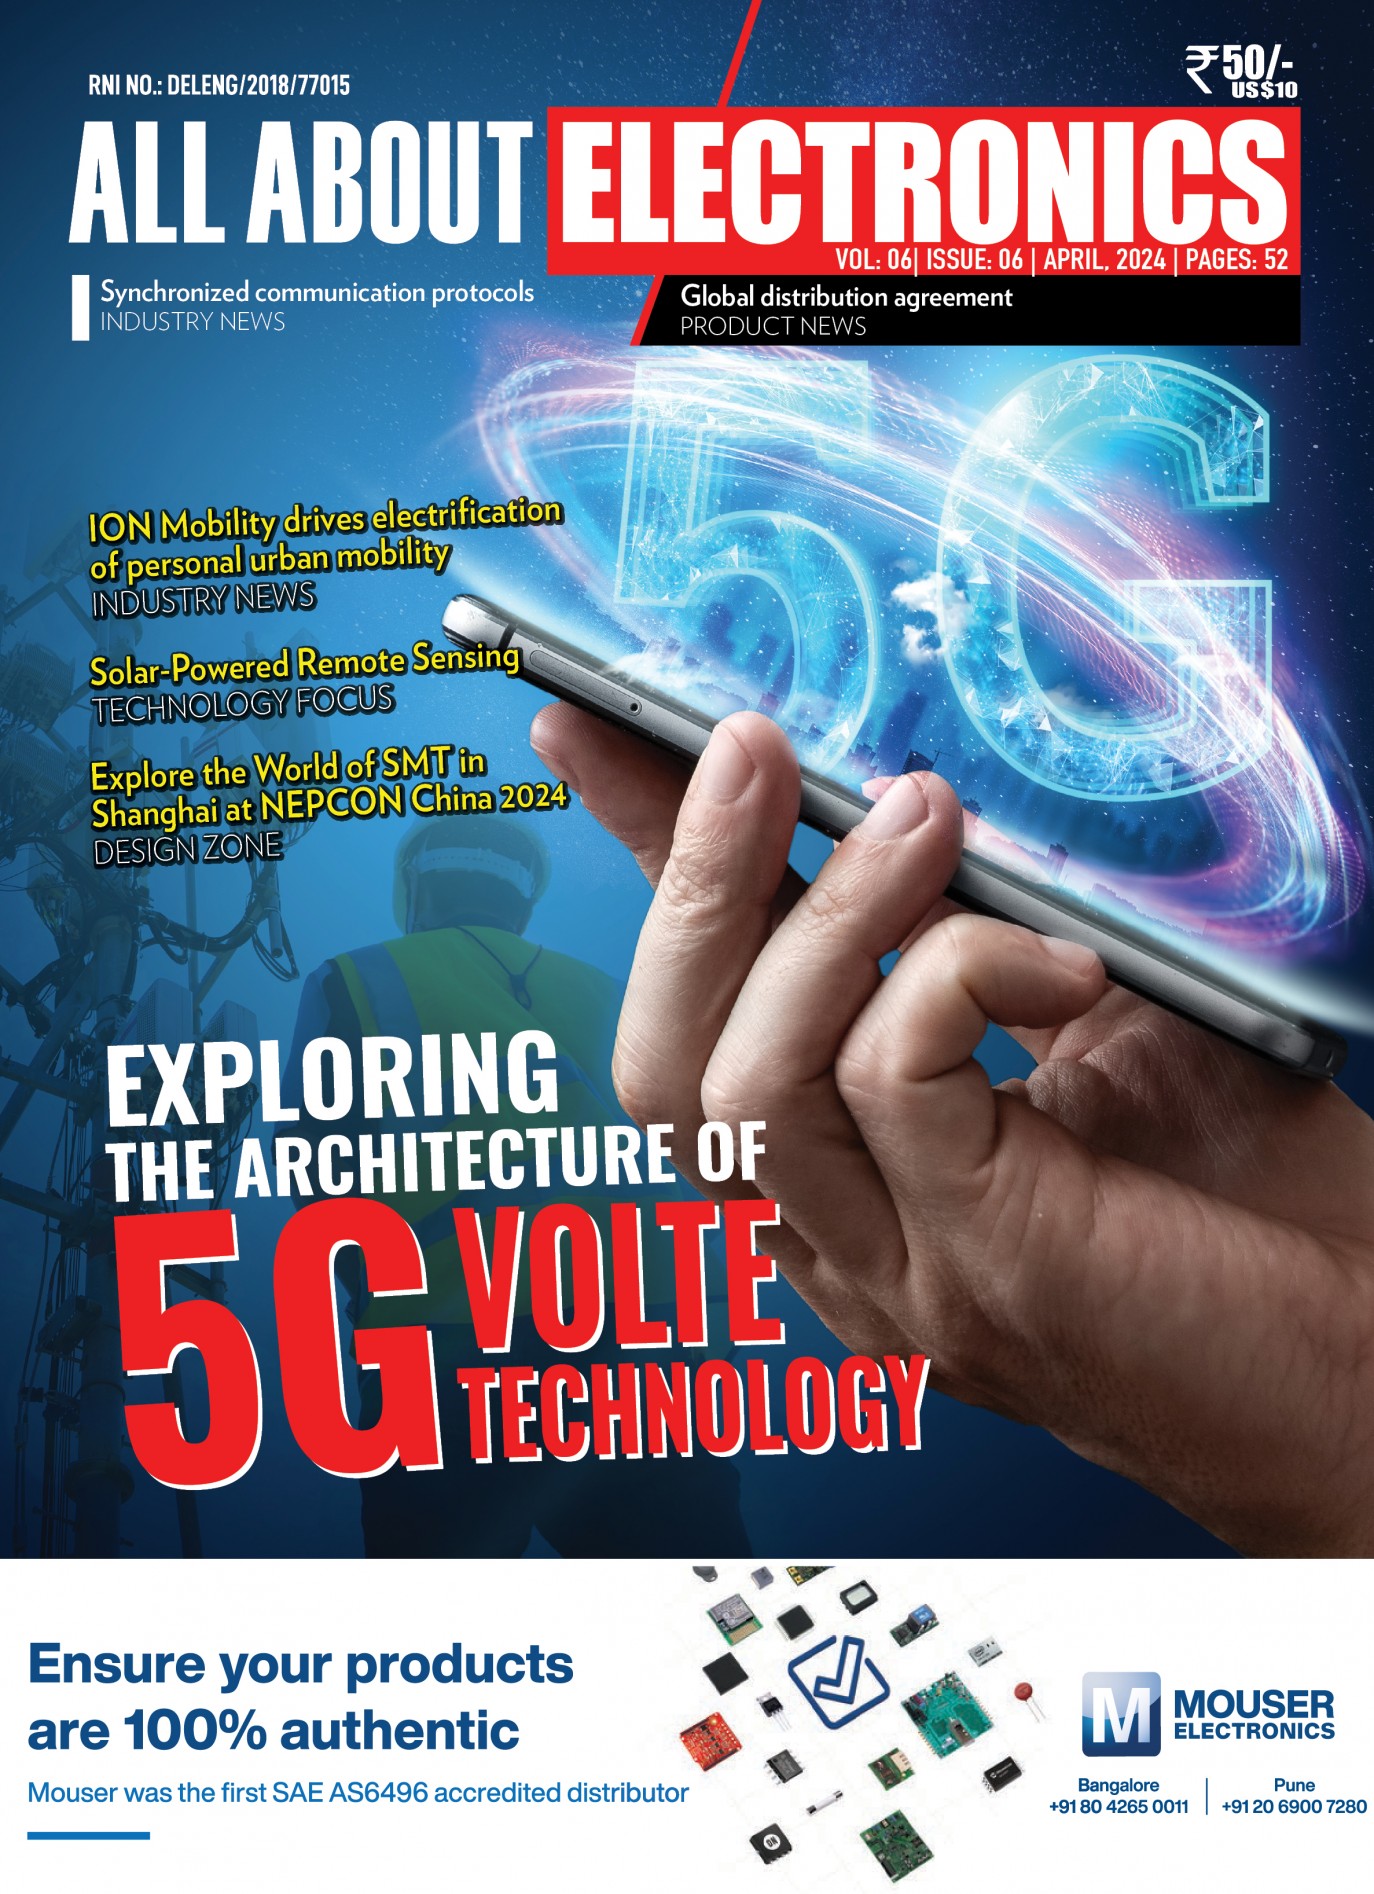 All About Electronics Magazine Apr 2024